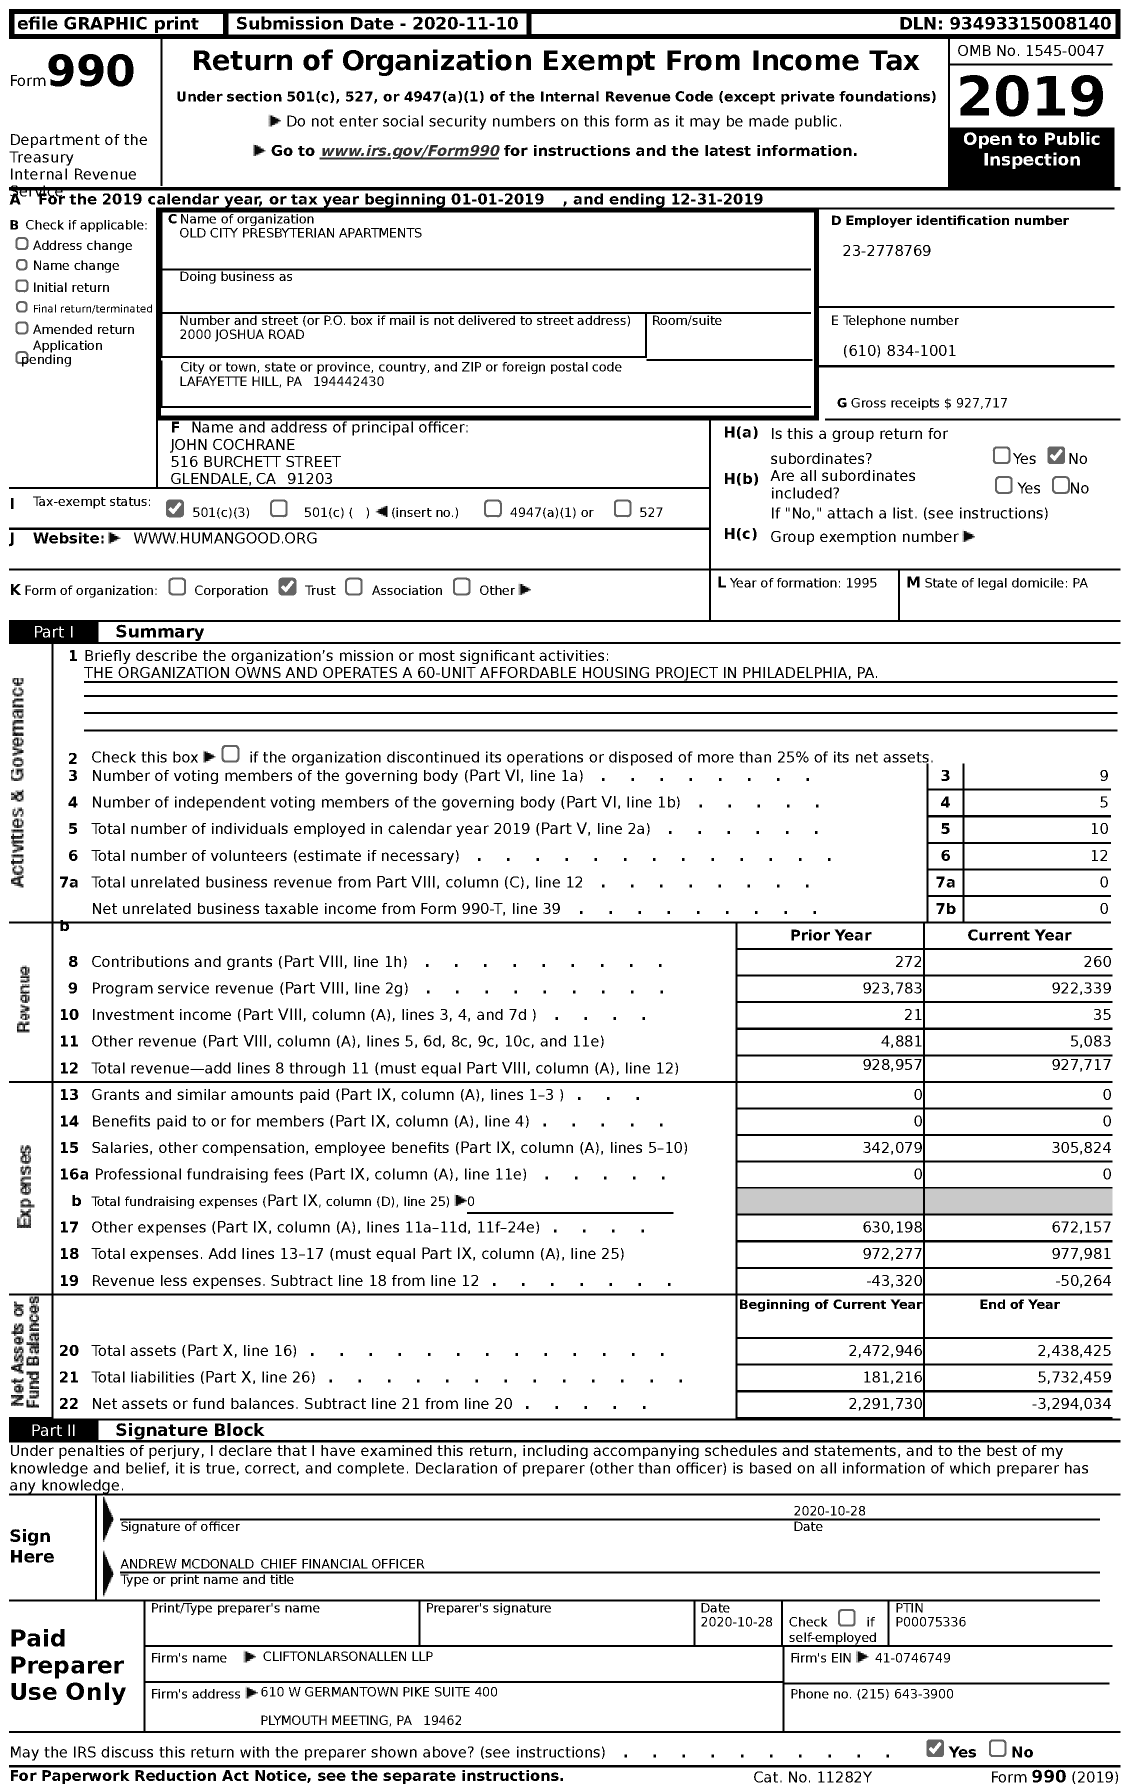 Image of first page of 2019 Form 990 for Old City Presbyterian Apartments